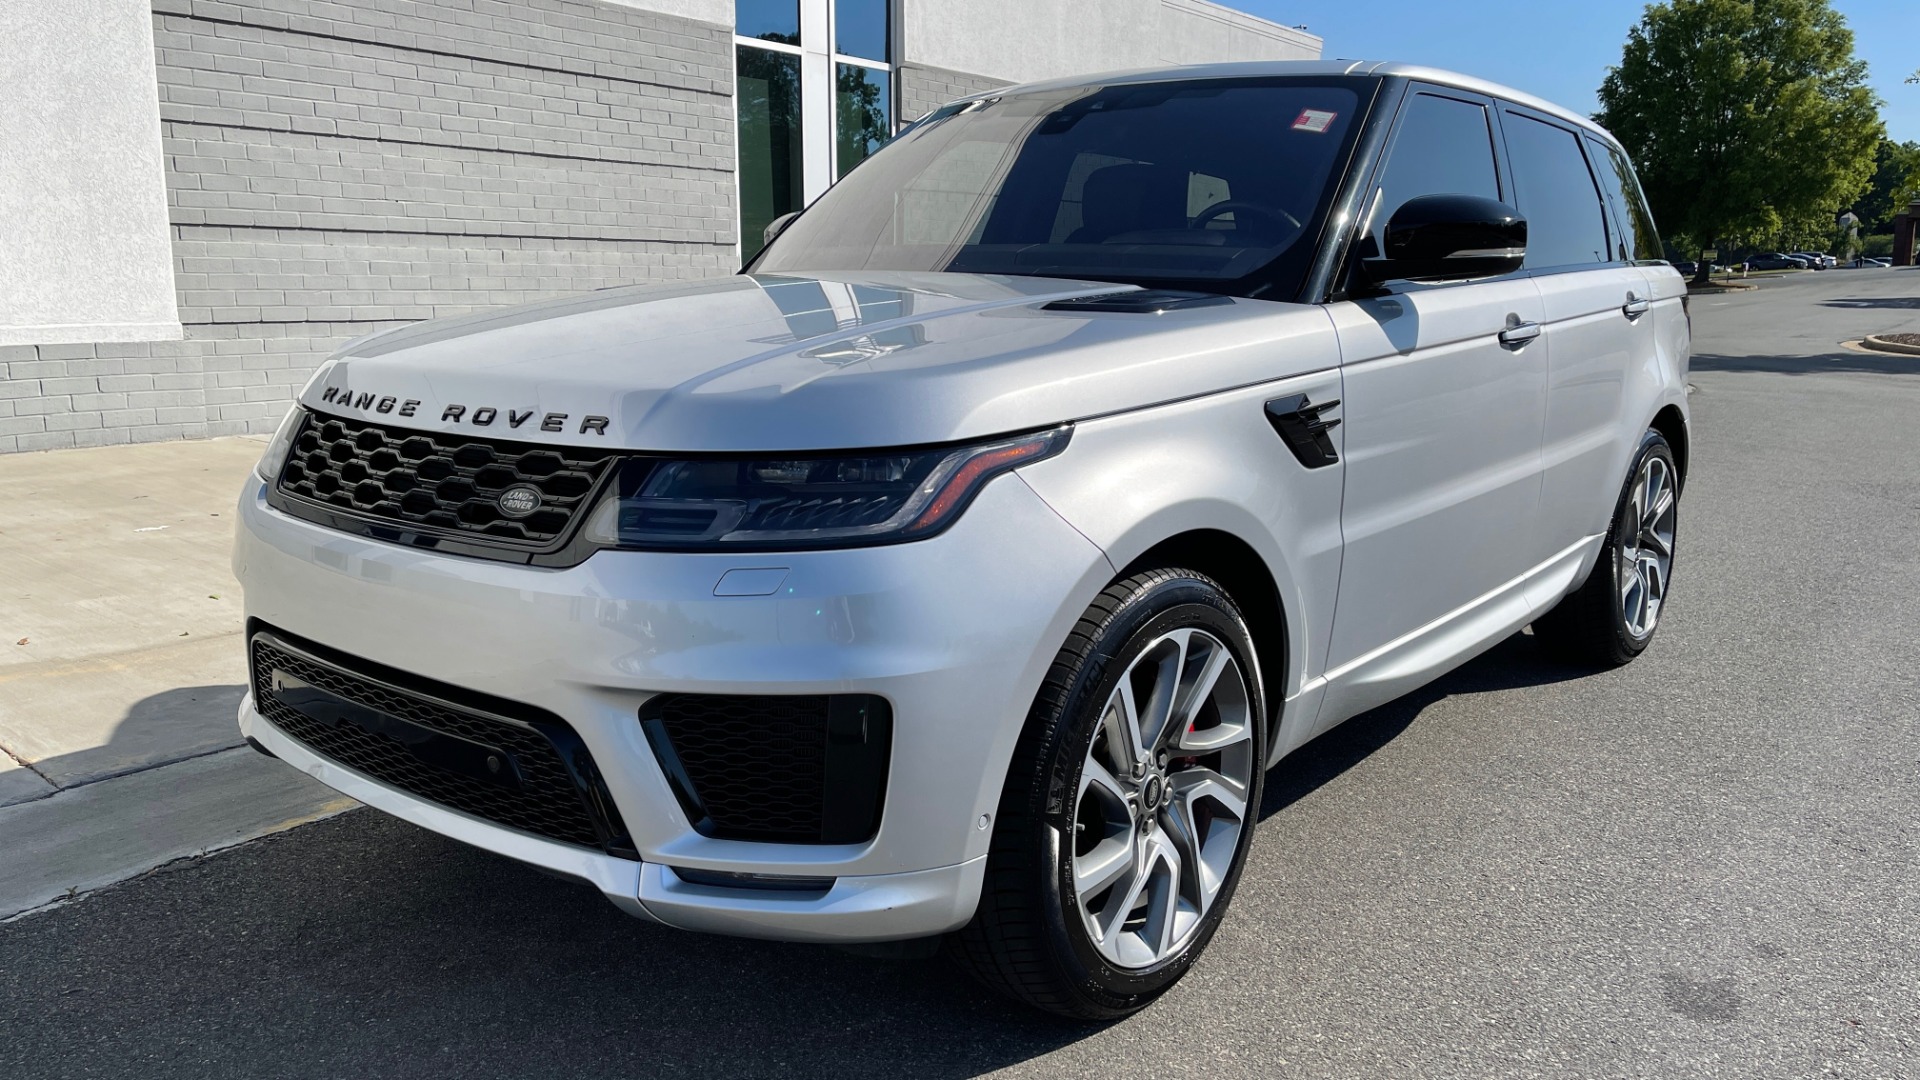 Used 2019 Land Rover RANGE ROVER SPORT HSE DYNAMIC / 3.0L SC V6 / 8-SPD / APPLE / NAV / SUNROOF / REARVIEW for sale Sold at Formula Imports in Charlotte NC 28227 4